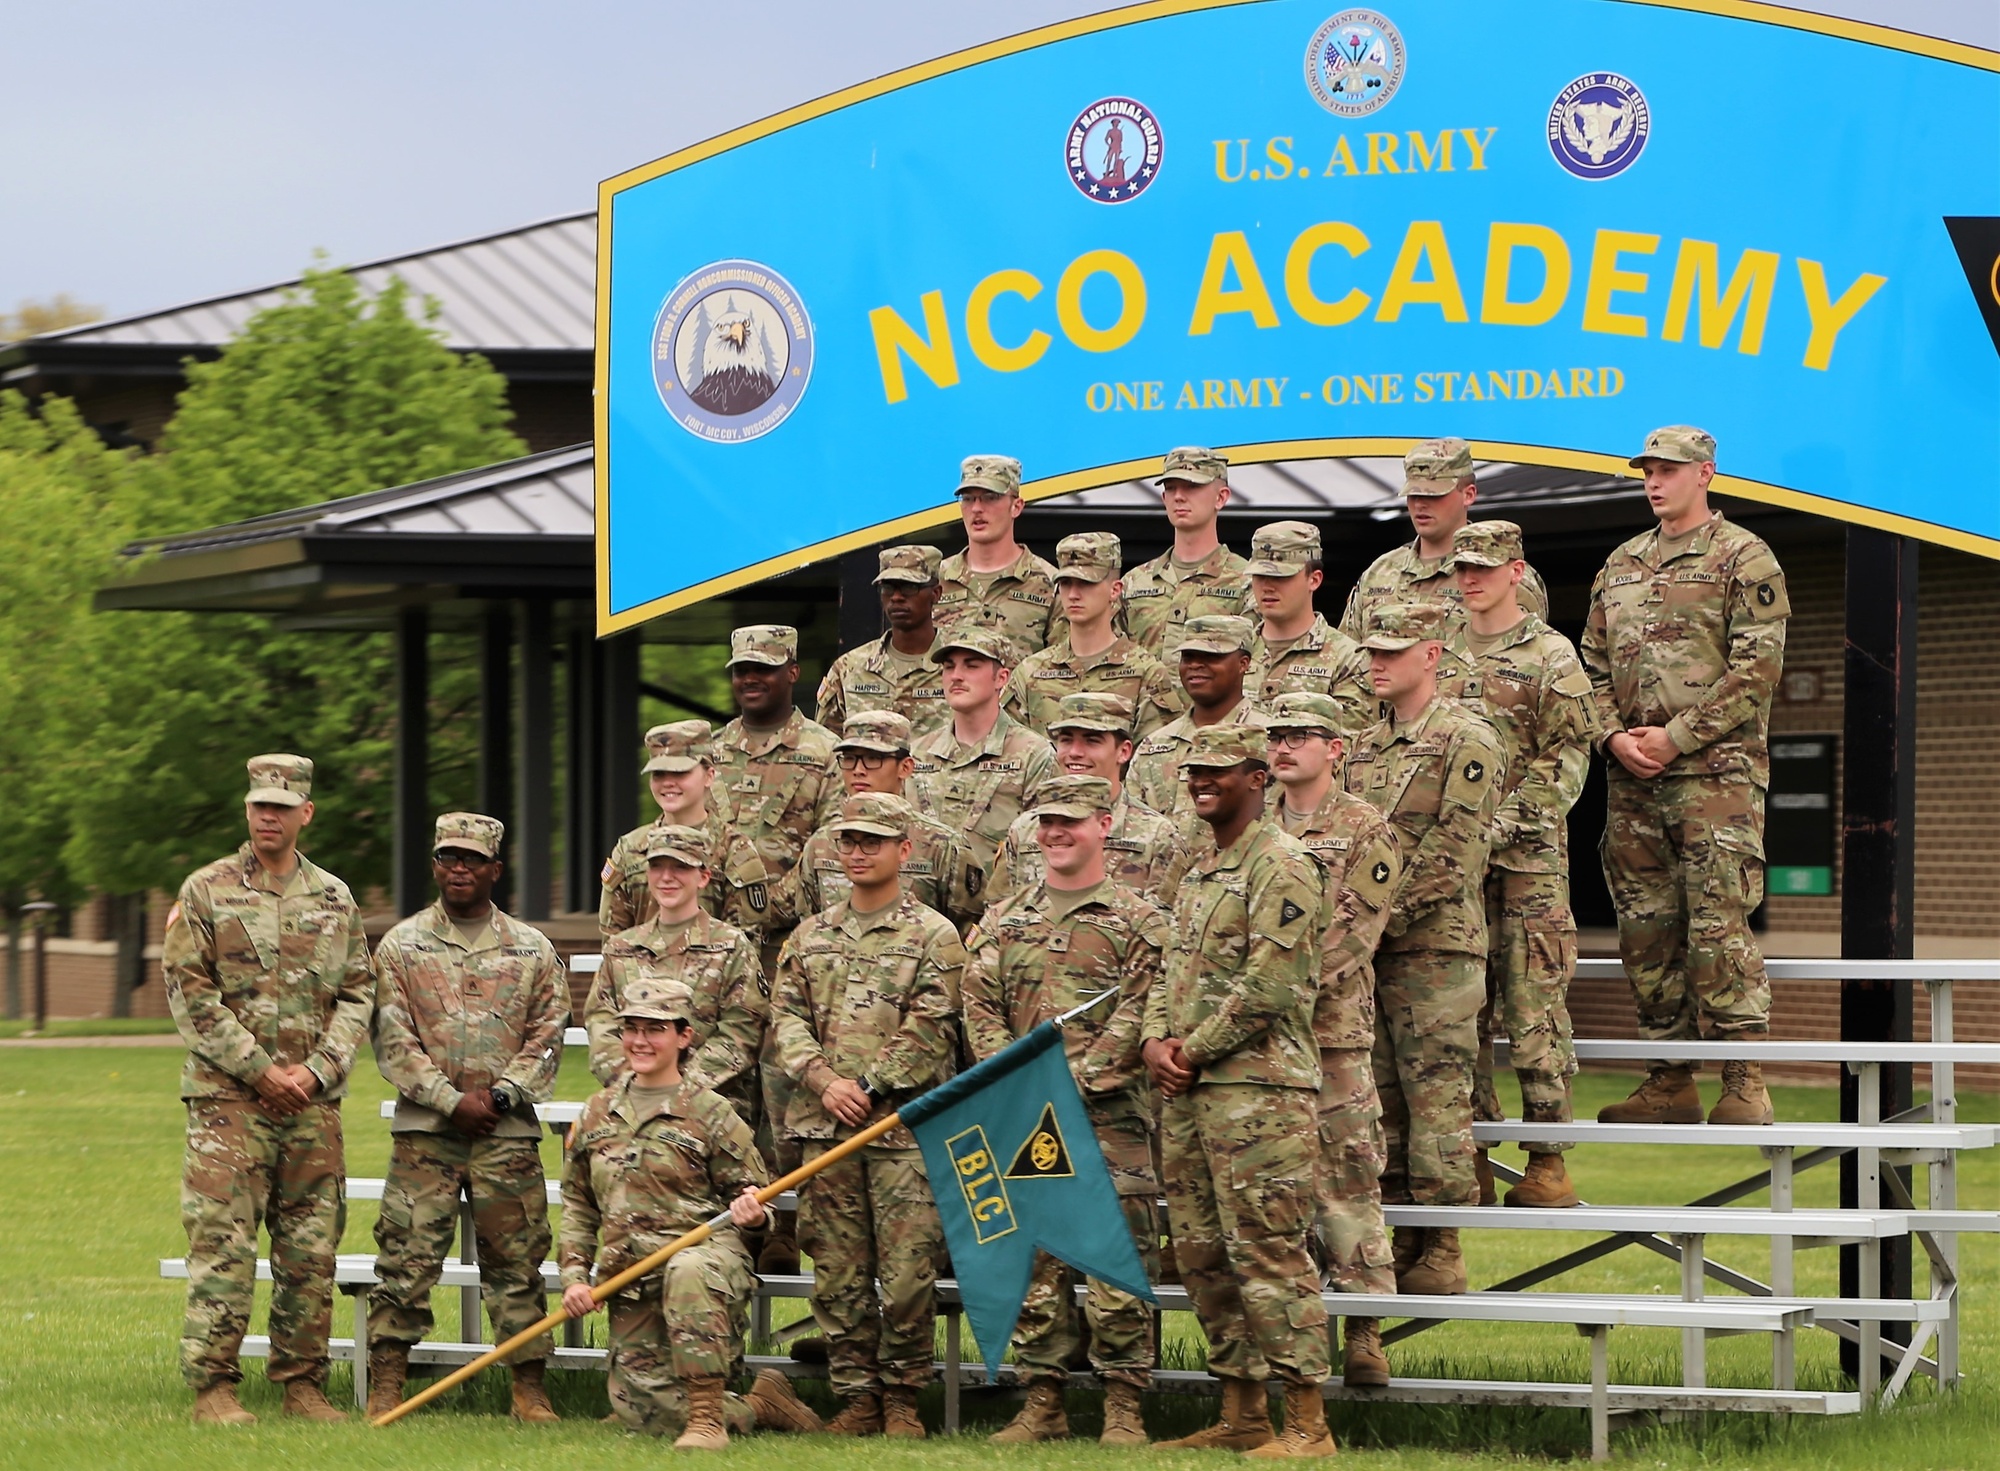 DVIDS - Images - Fort McCoy NCO Academy operations in May 2022 [Image 1 of 9]